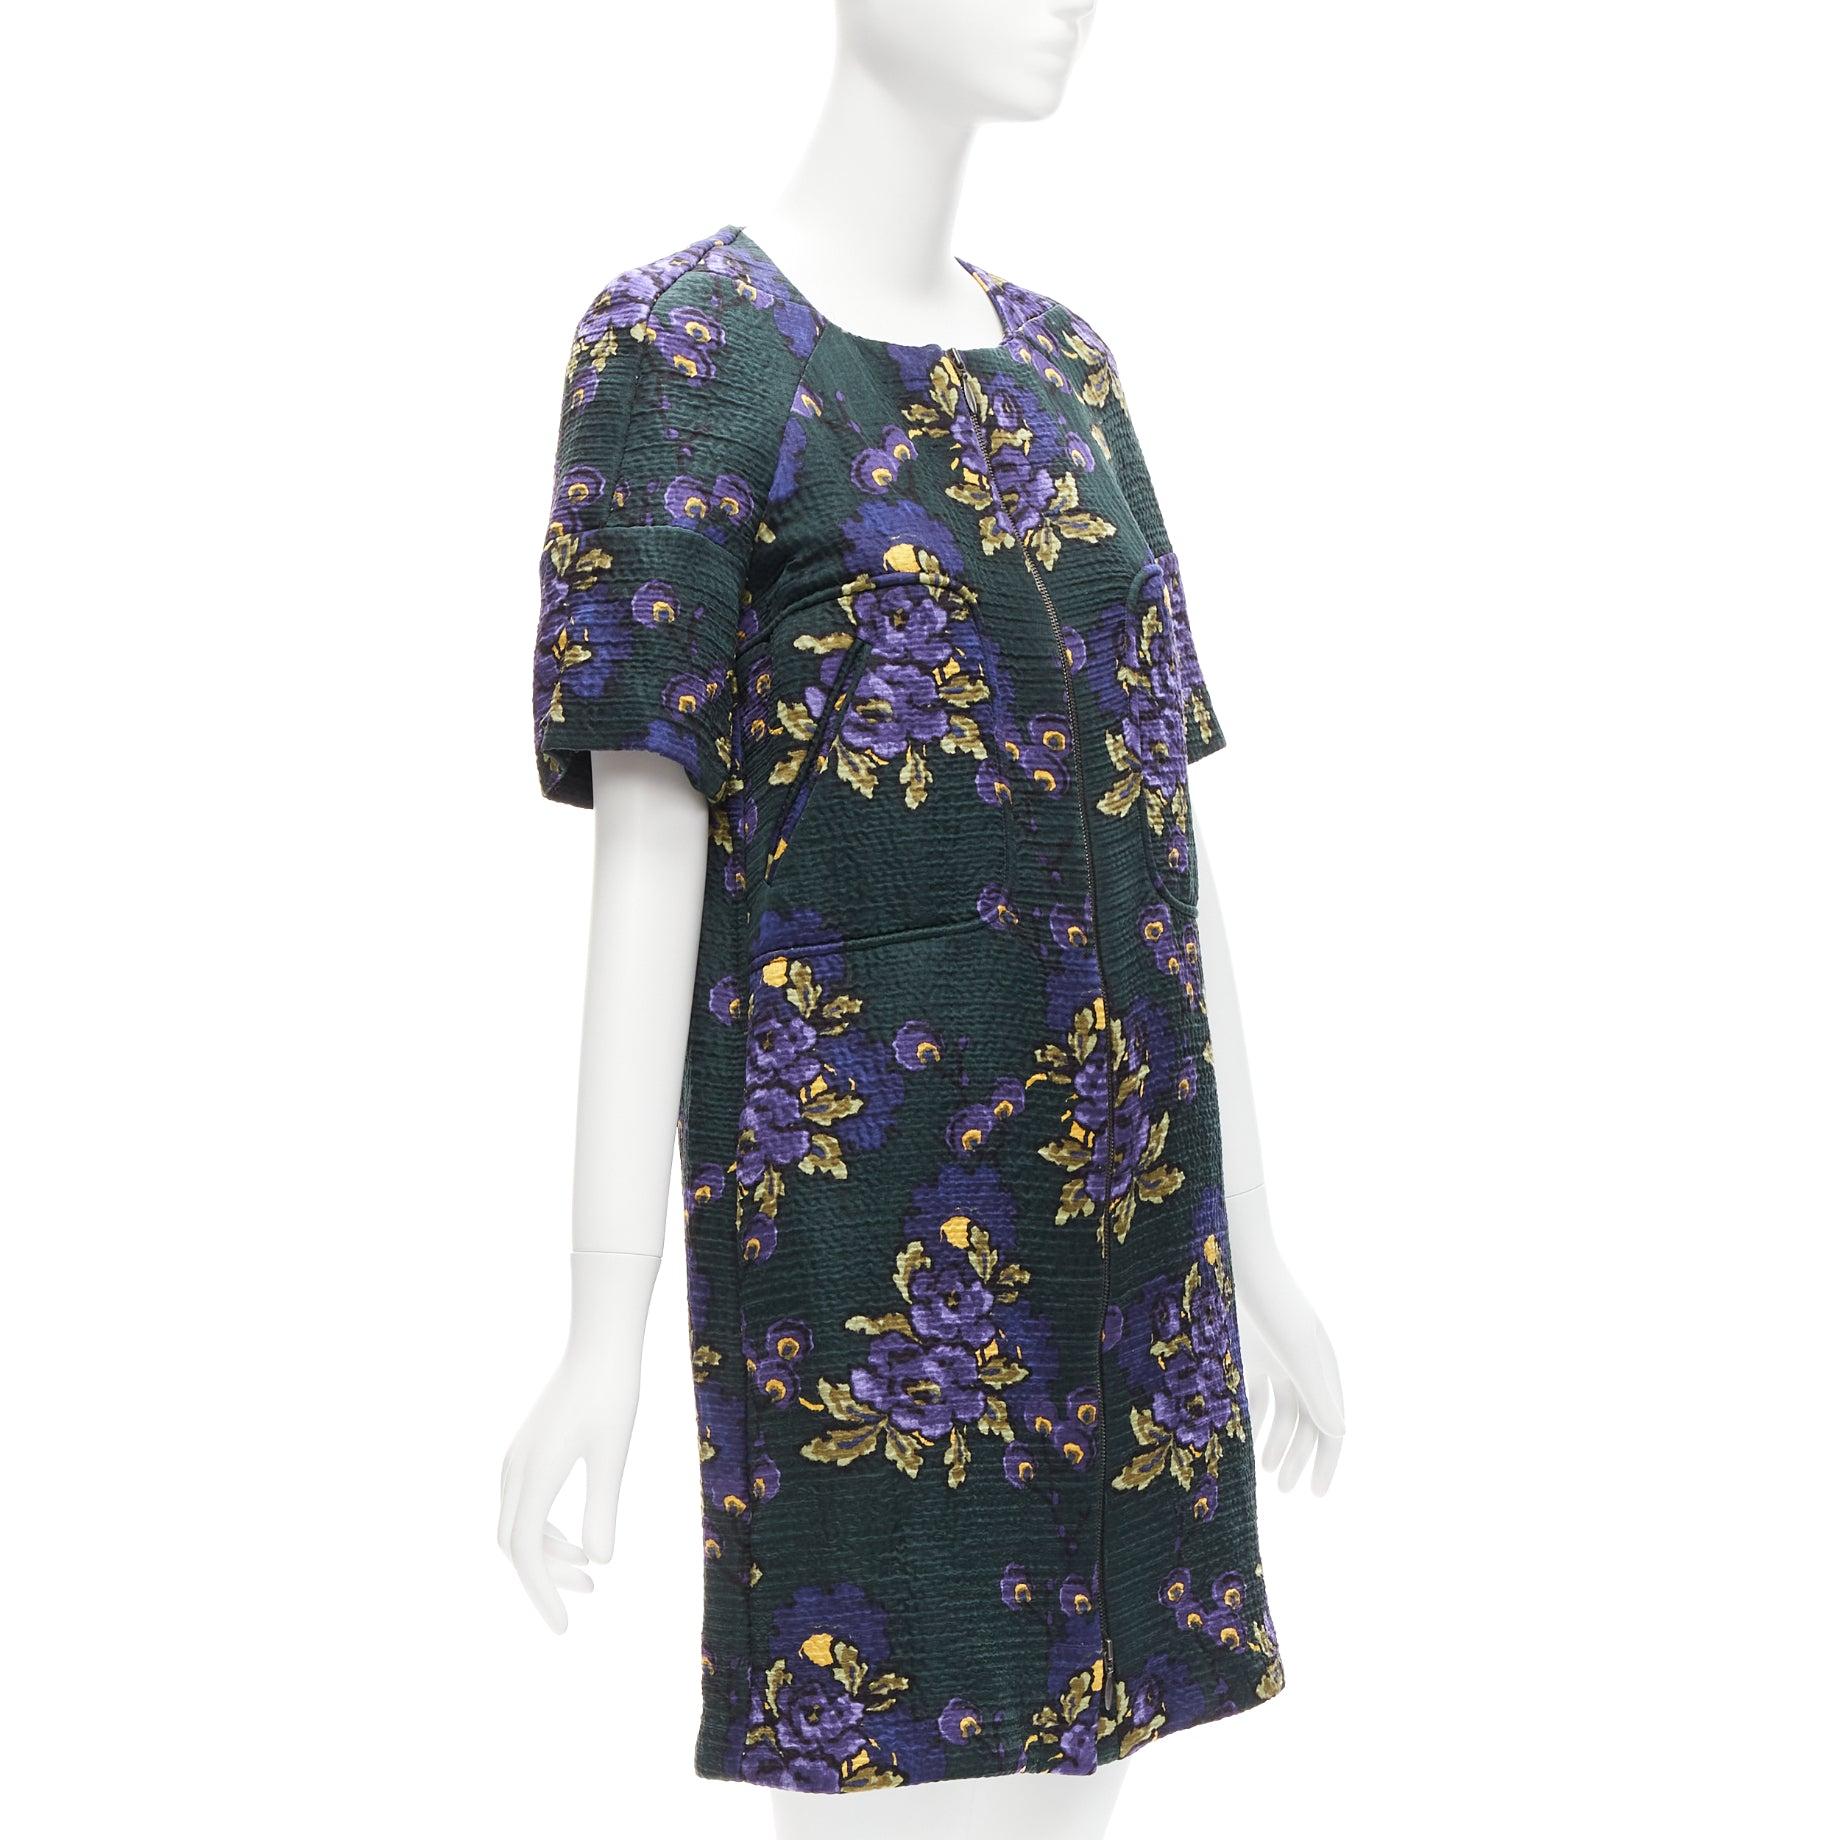 MARNI green purple wool silk cloque floral print zip coat dress IT38 XS
Reference: CELG/A00249
Brand: Marni
Material: Cotton, Silk, Blend
Color: Green, Purple
Pattern: Floral
Closure: Zip
Lining: Black Fabric
Made in: Italy

CONDITION:
Condition: